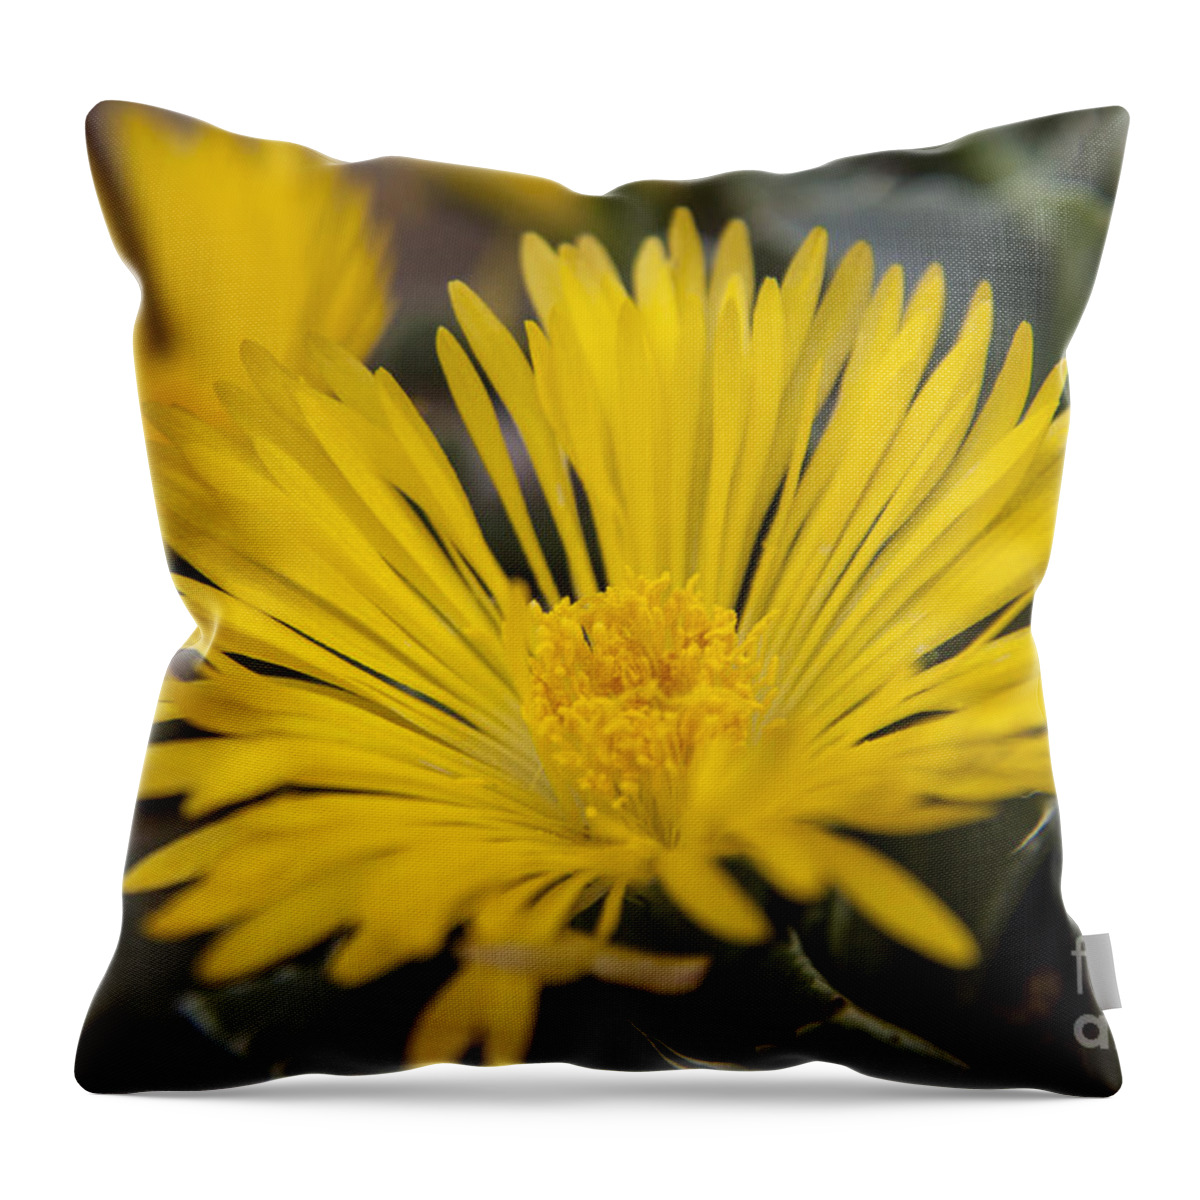 Tiger Throw Pillow featuring the photograph Tiger Claw Plant by Darleen Stry